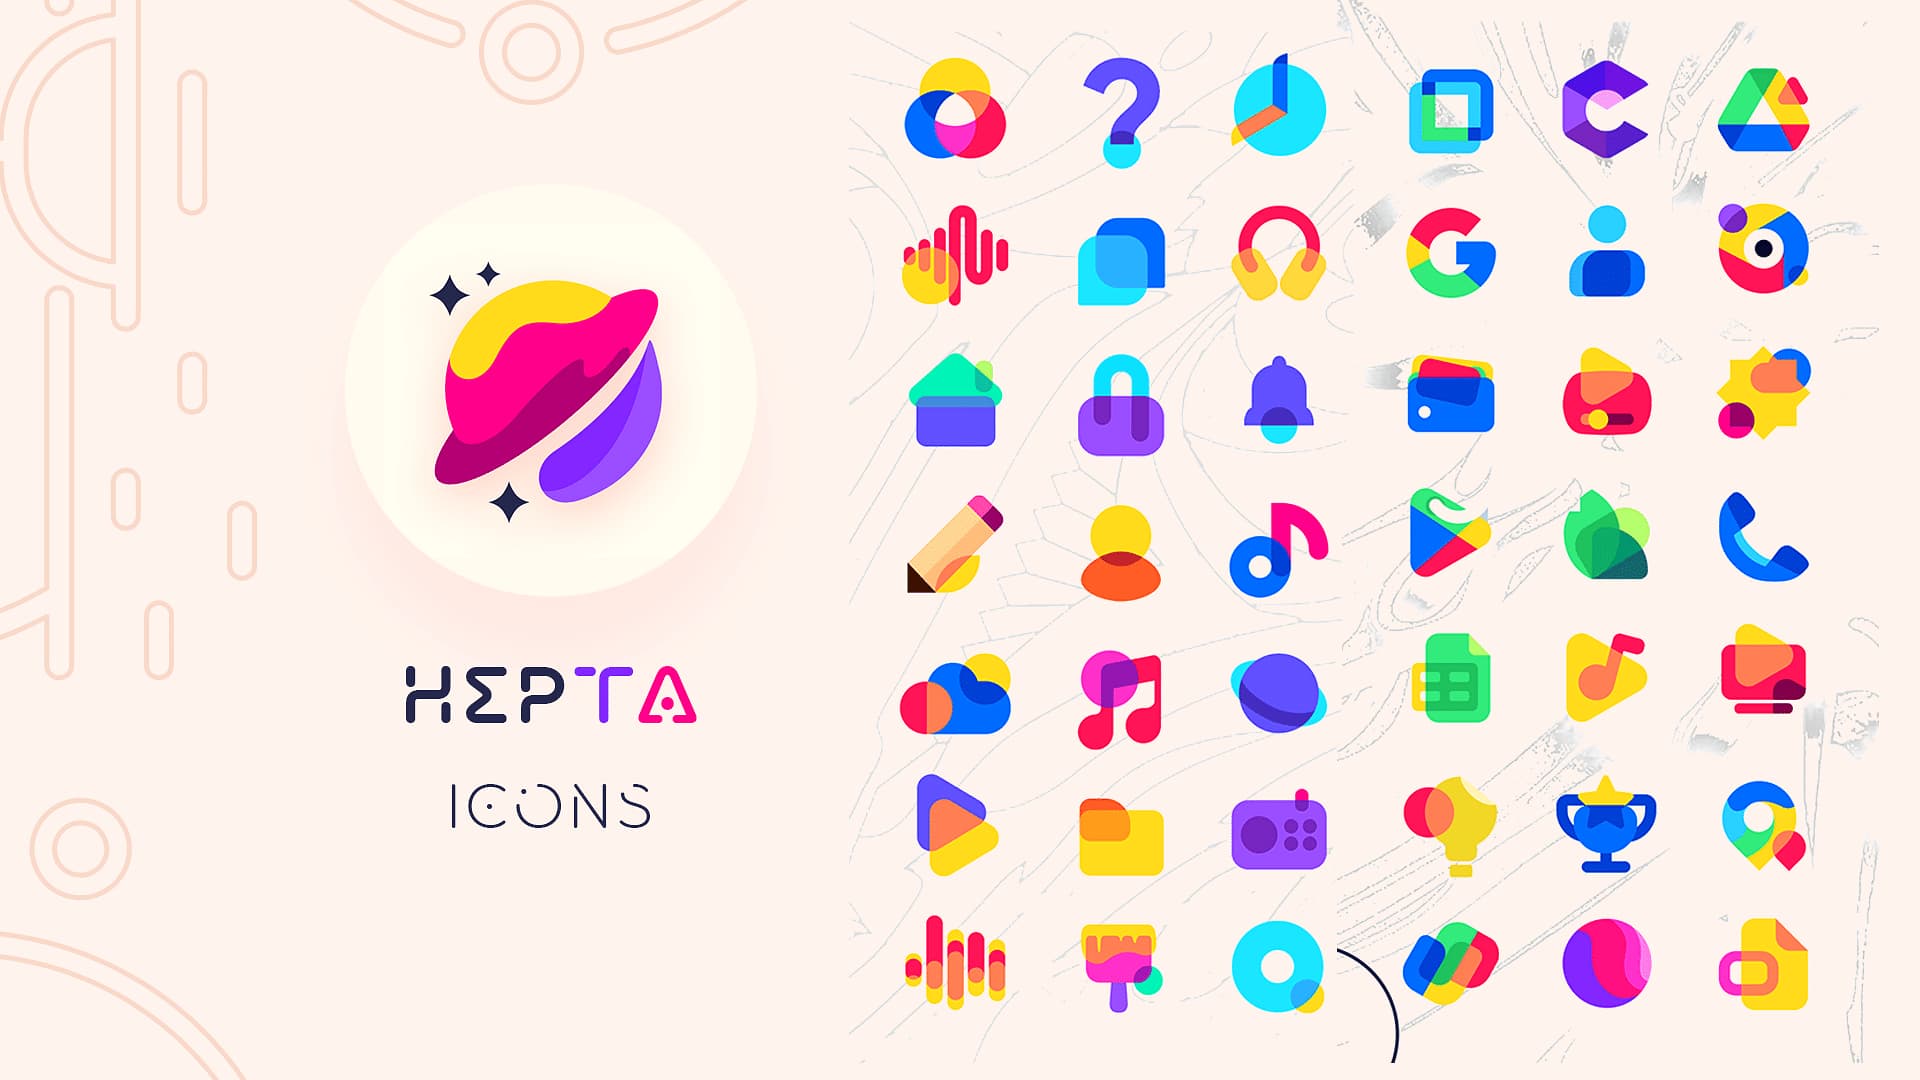 HEPTA Theme brings exciting colorful app icons to your Home Screen